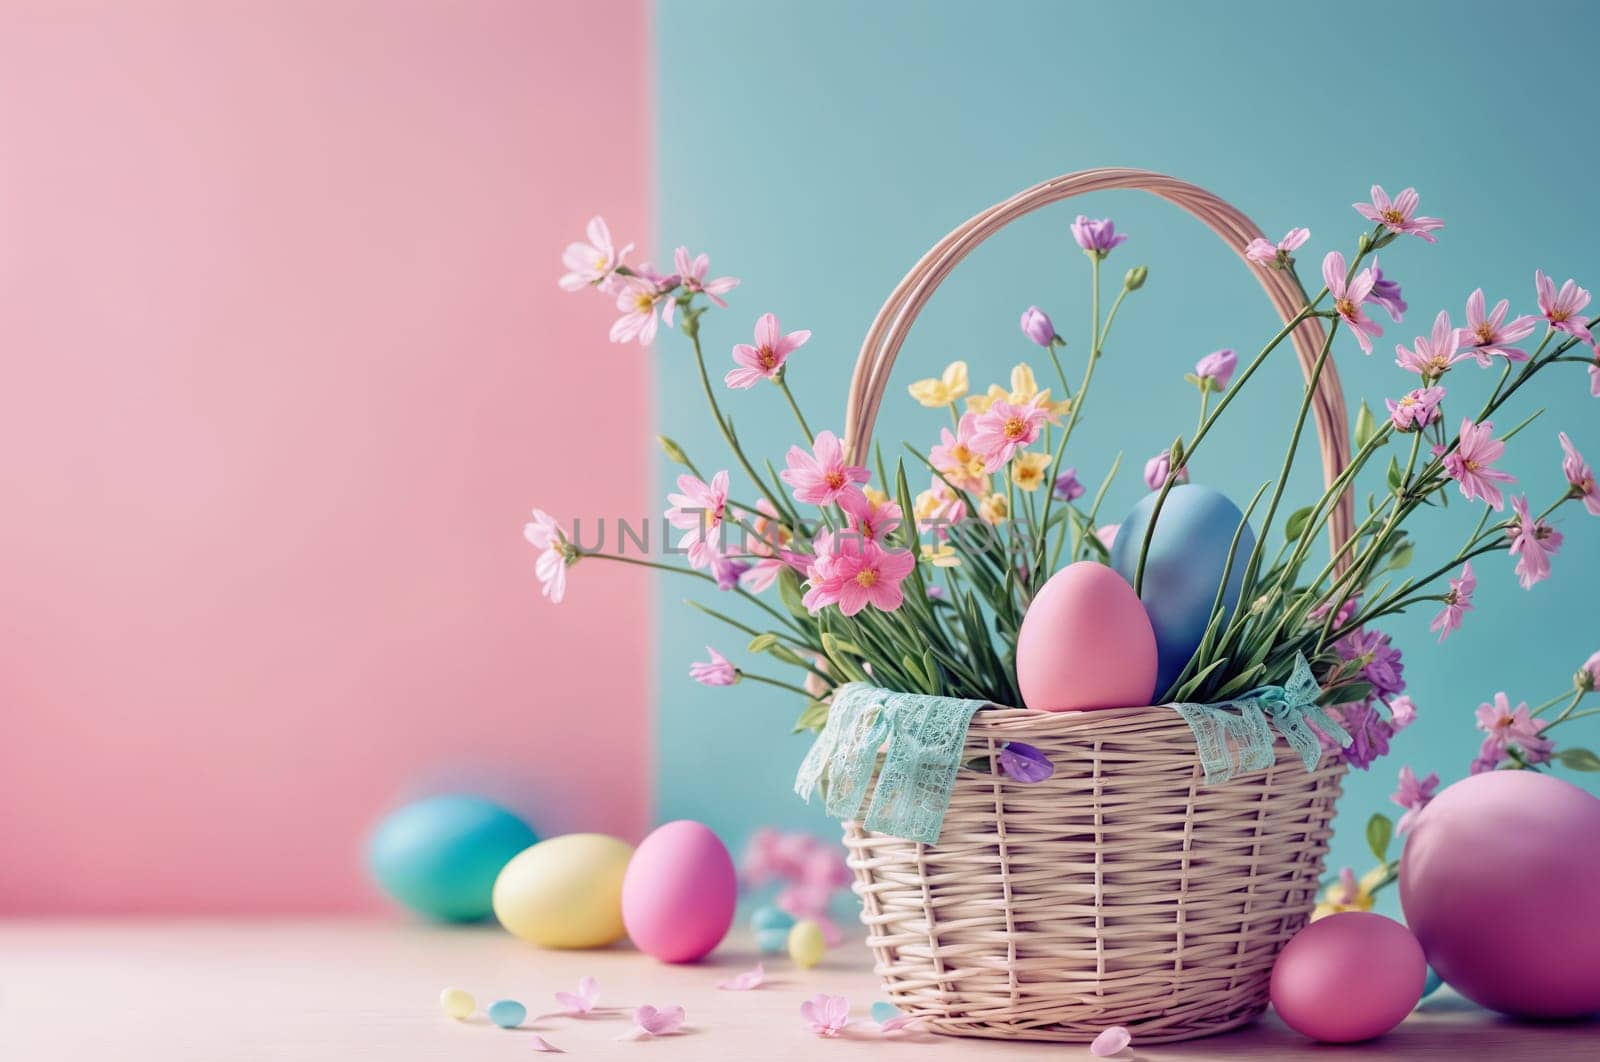 Easter Celebration With Colorful Eggs and Spring Flowers in a Wicker Basket by chrisroll